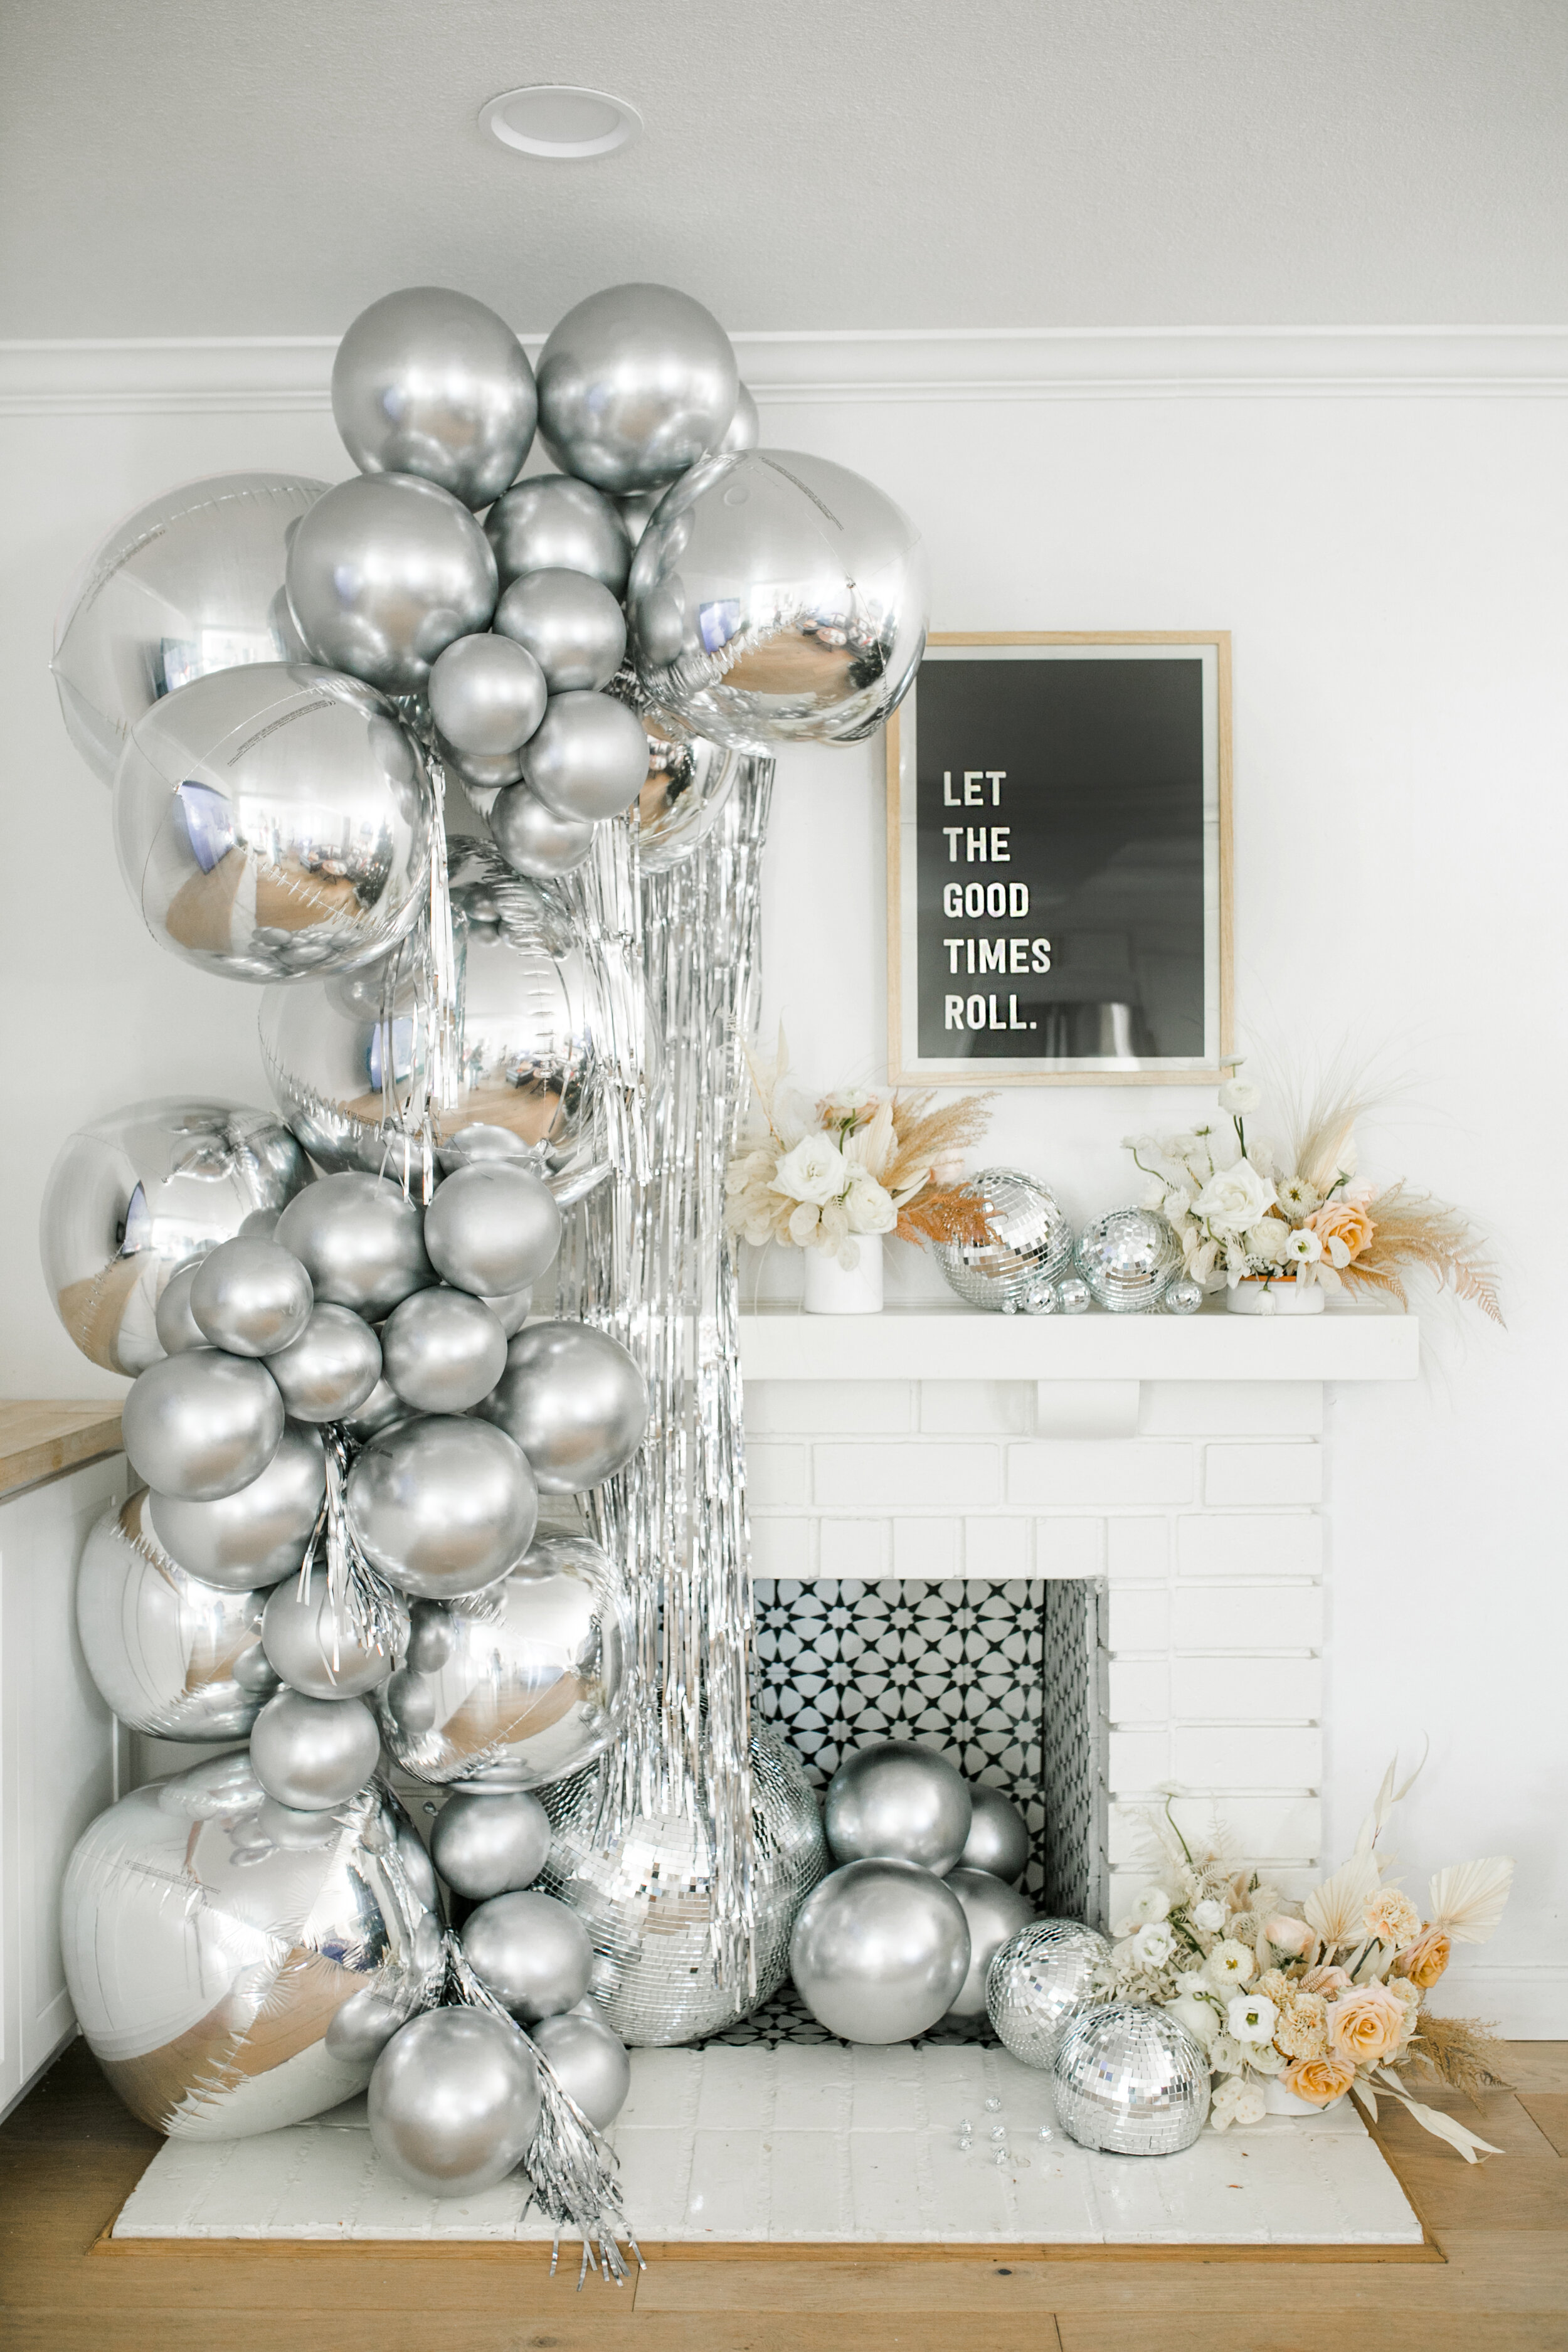 A Black, White and Silver Party: by The Inspired Occasion - Creative and  Fun Wedding Ideas Made Simple